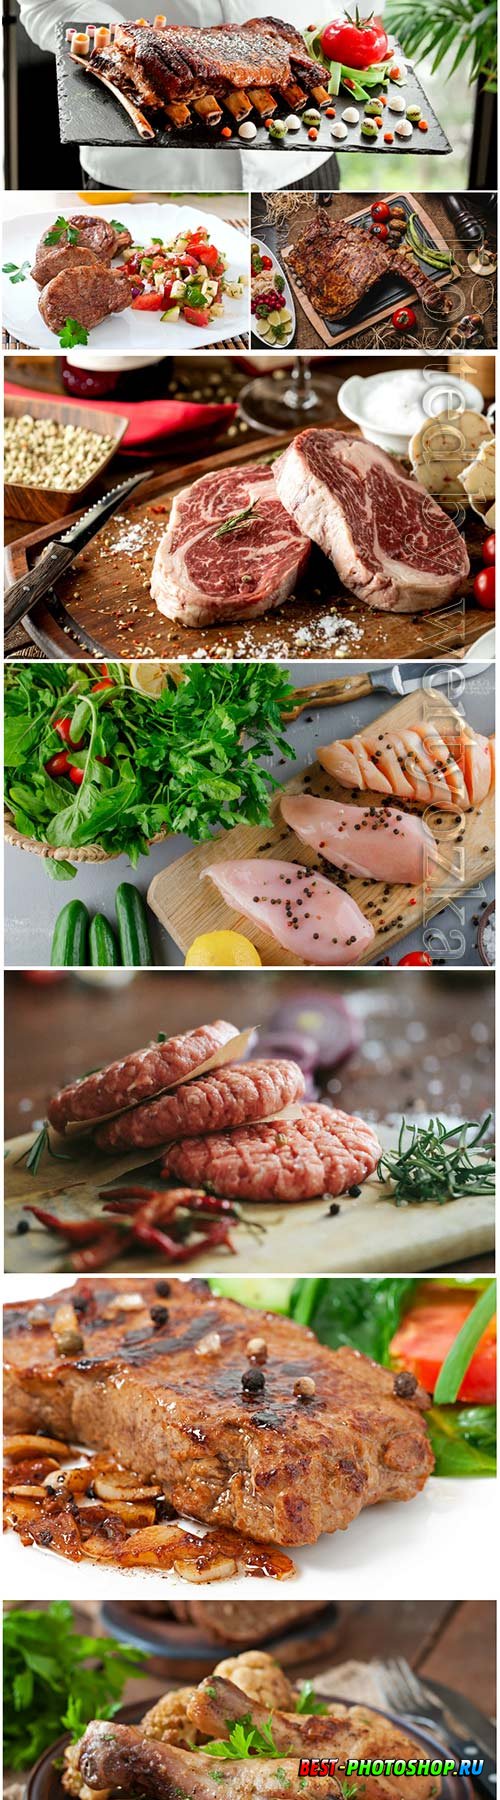 Delicious meat dishes stock photo